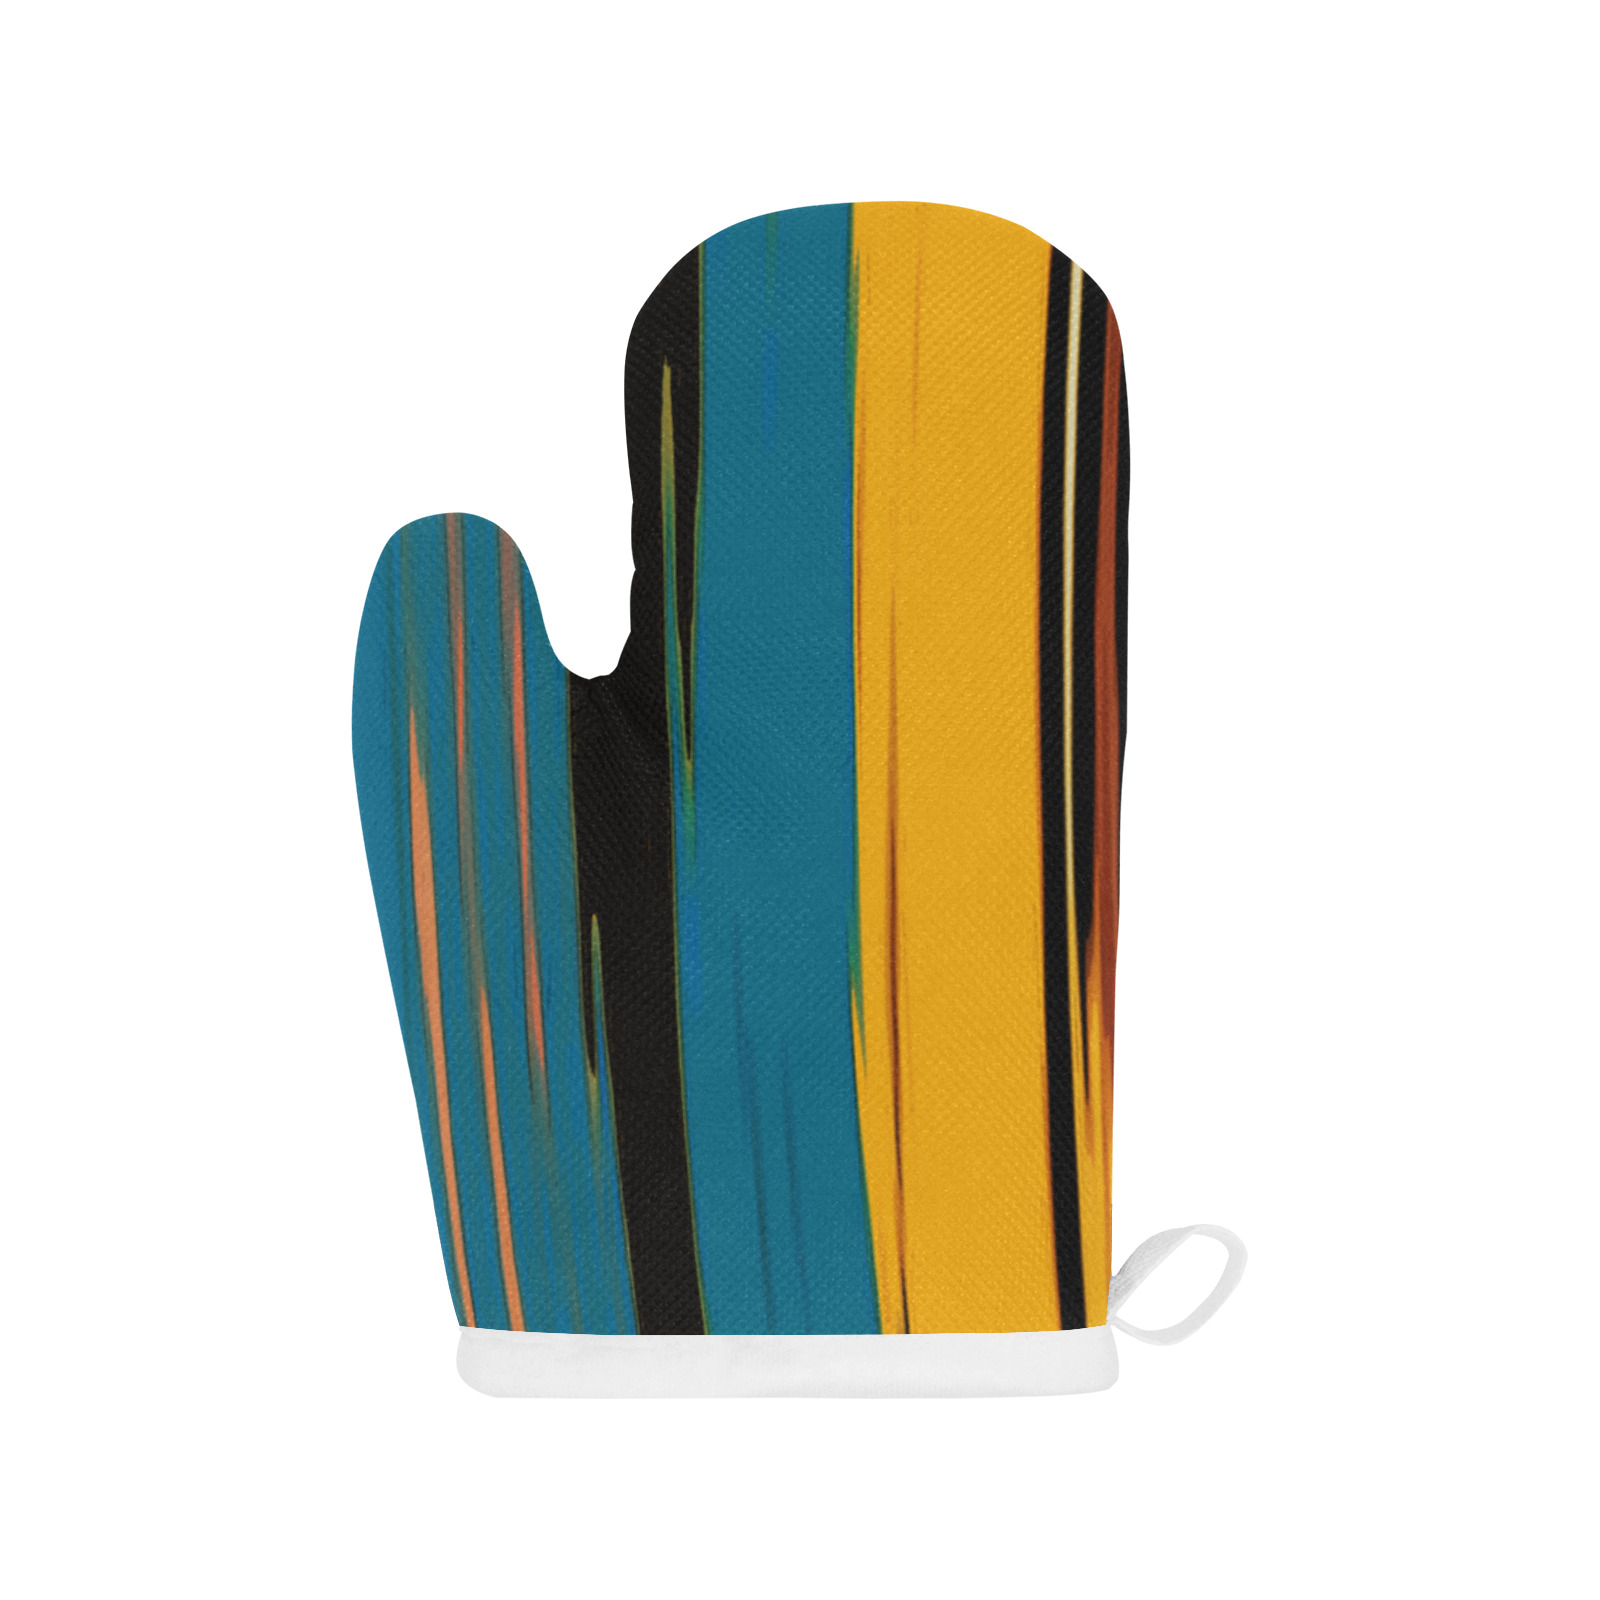 Black Turquoise And Orange Go! Abstract Art Linen Oven Mitt (Two Pieces)